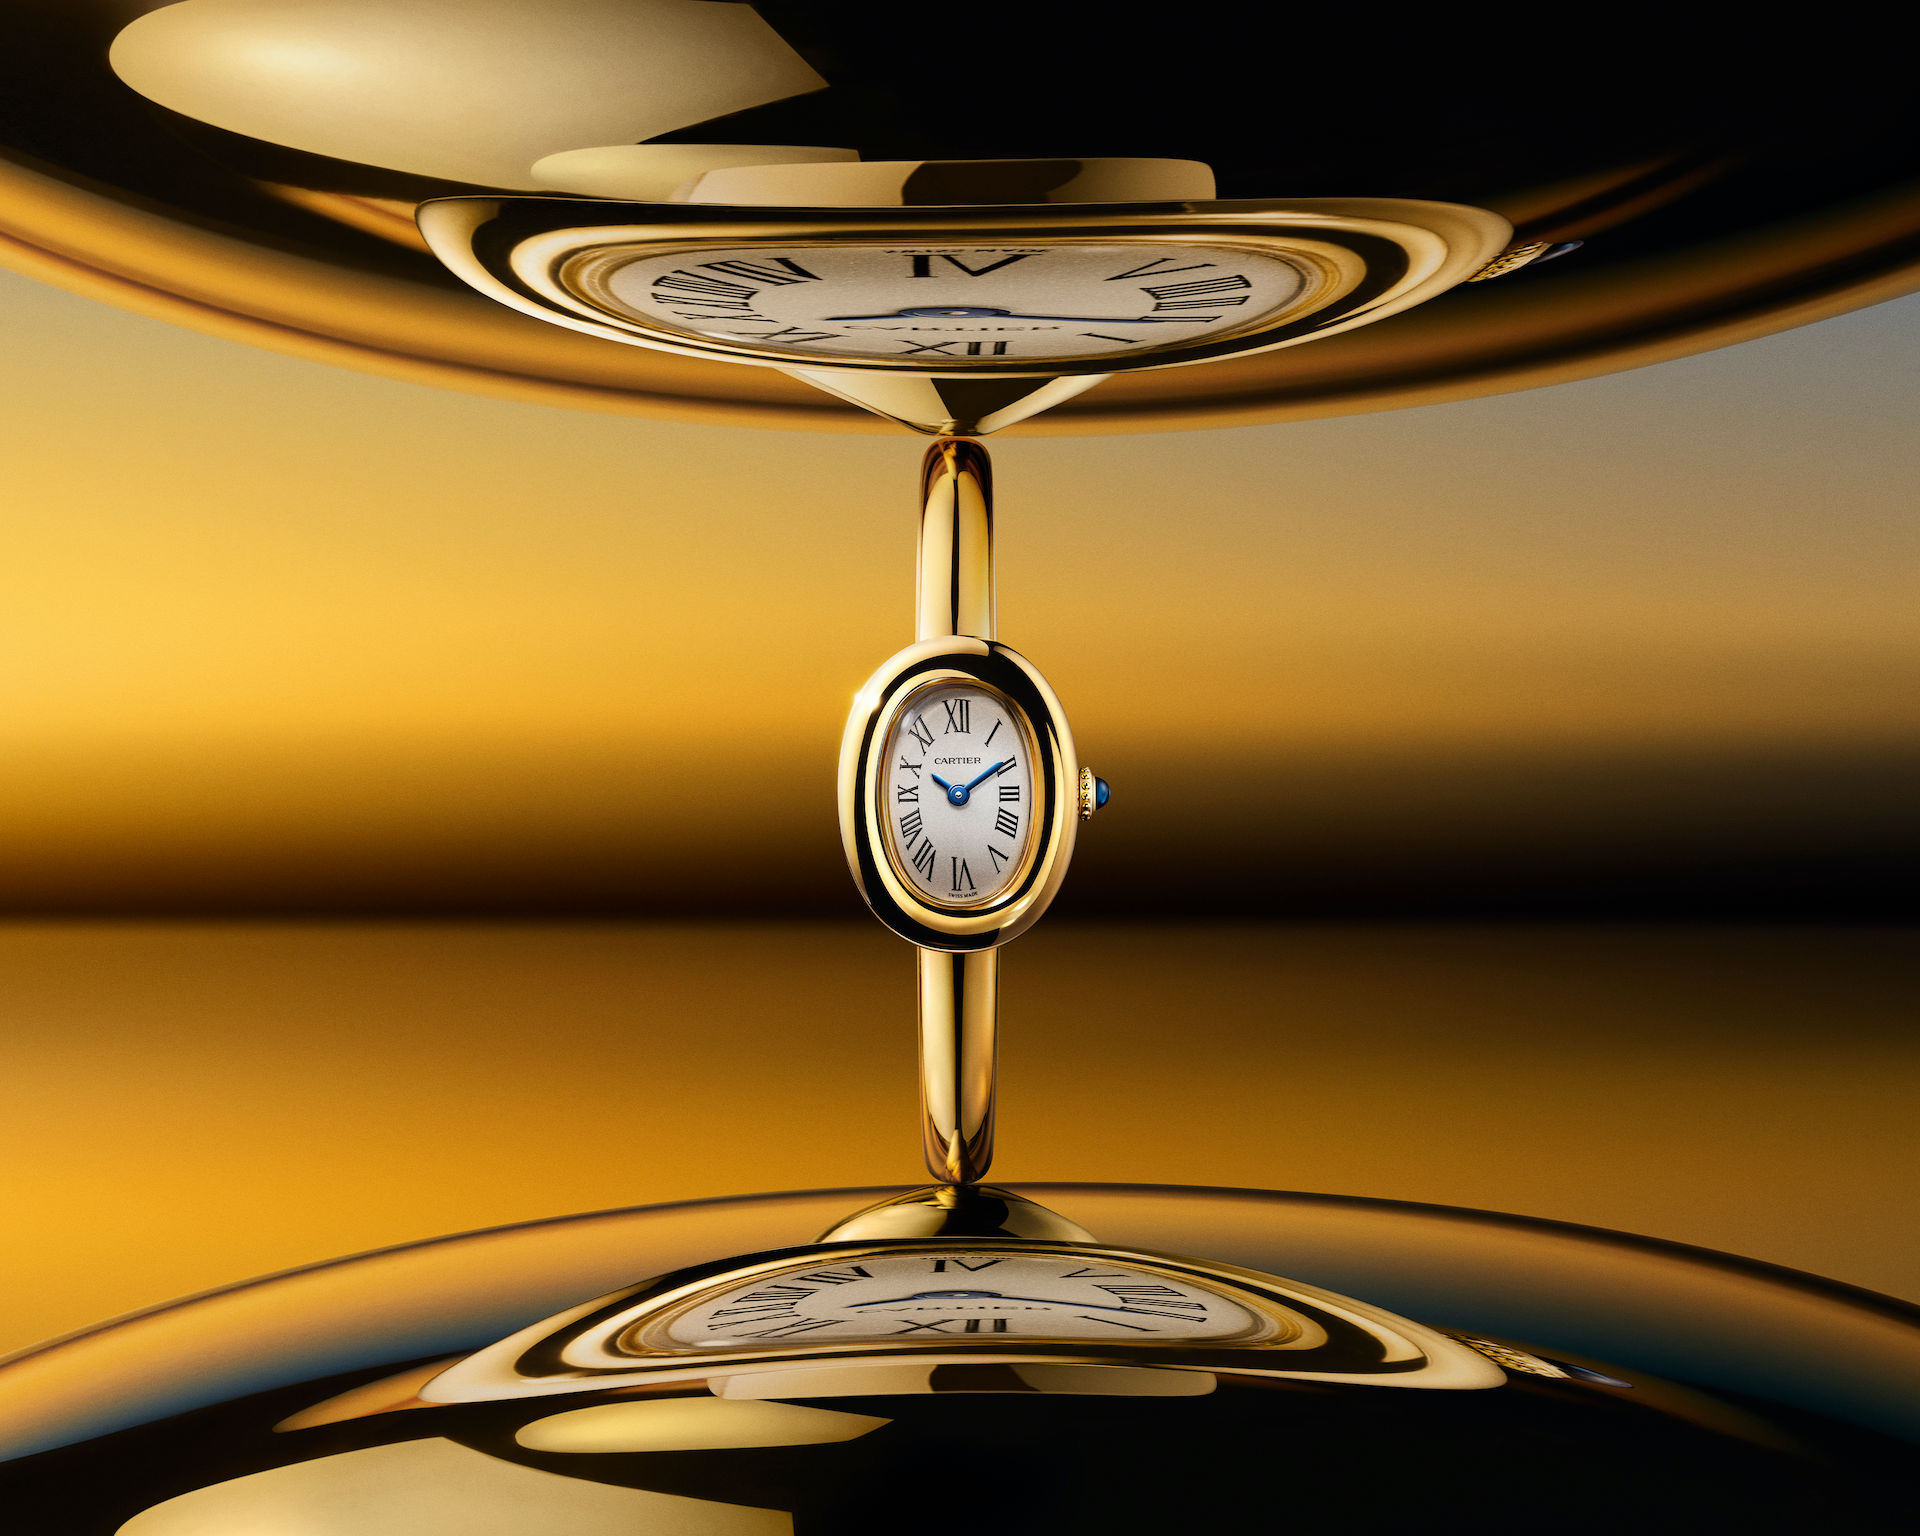 In 2023, Cartier reinvents the look of the baignoire watch line